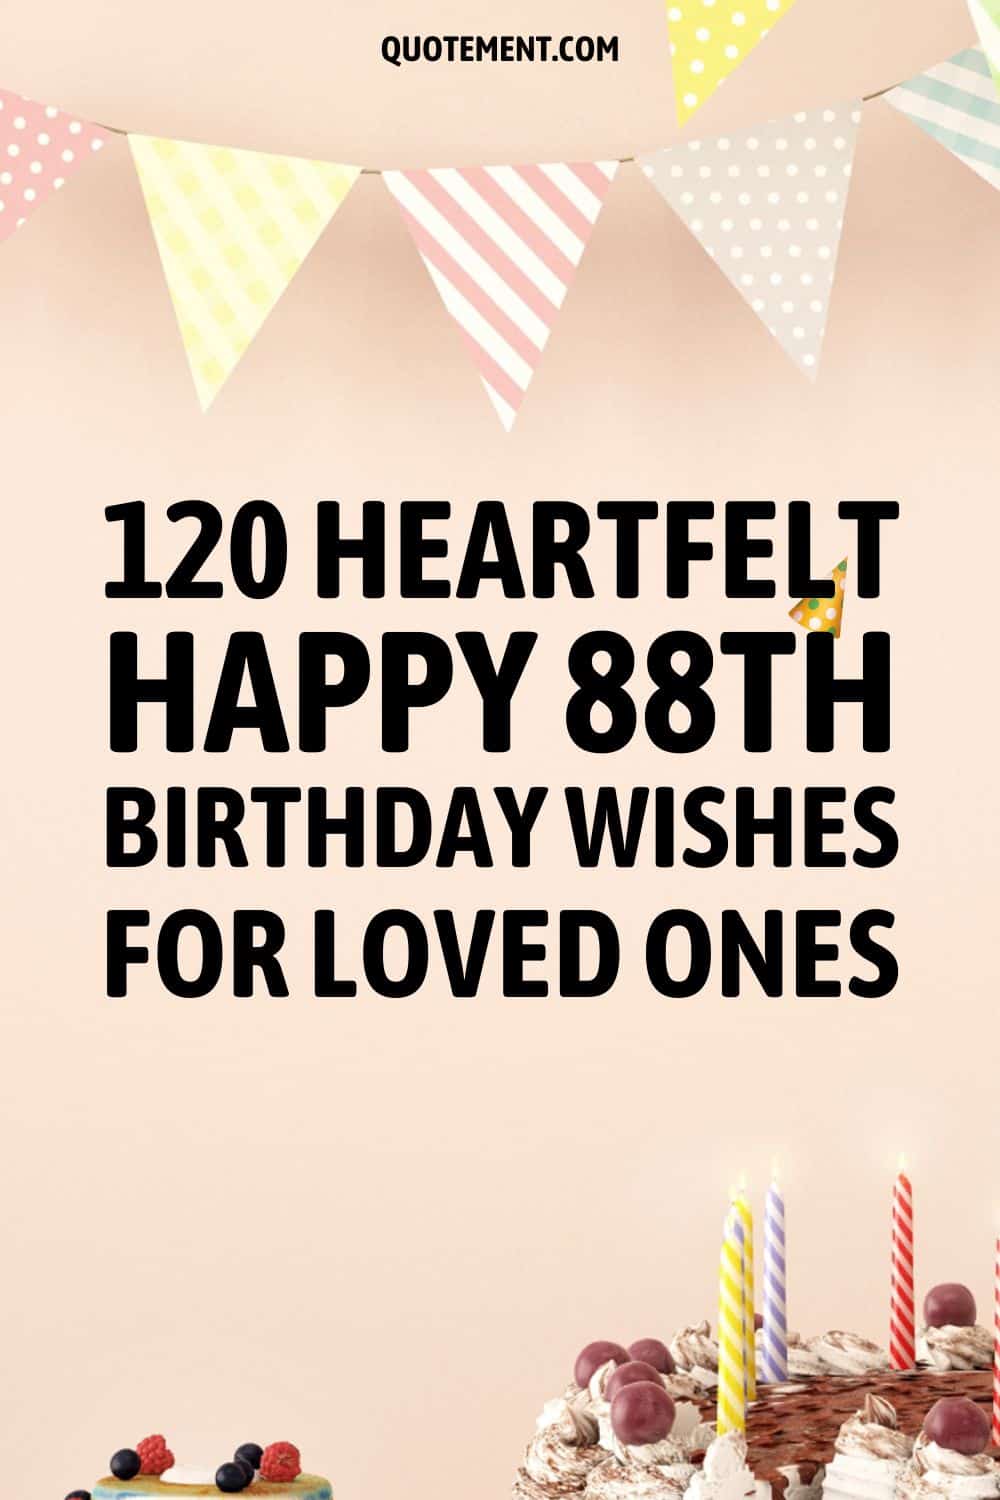 120 Heartfelt Happy 88th Birthday Wishes For Loved Ones